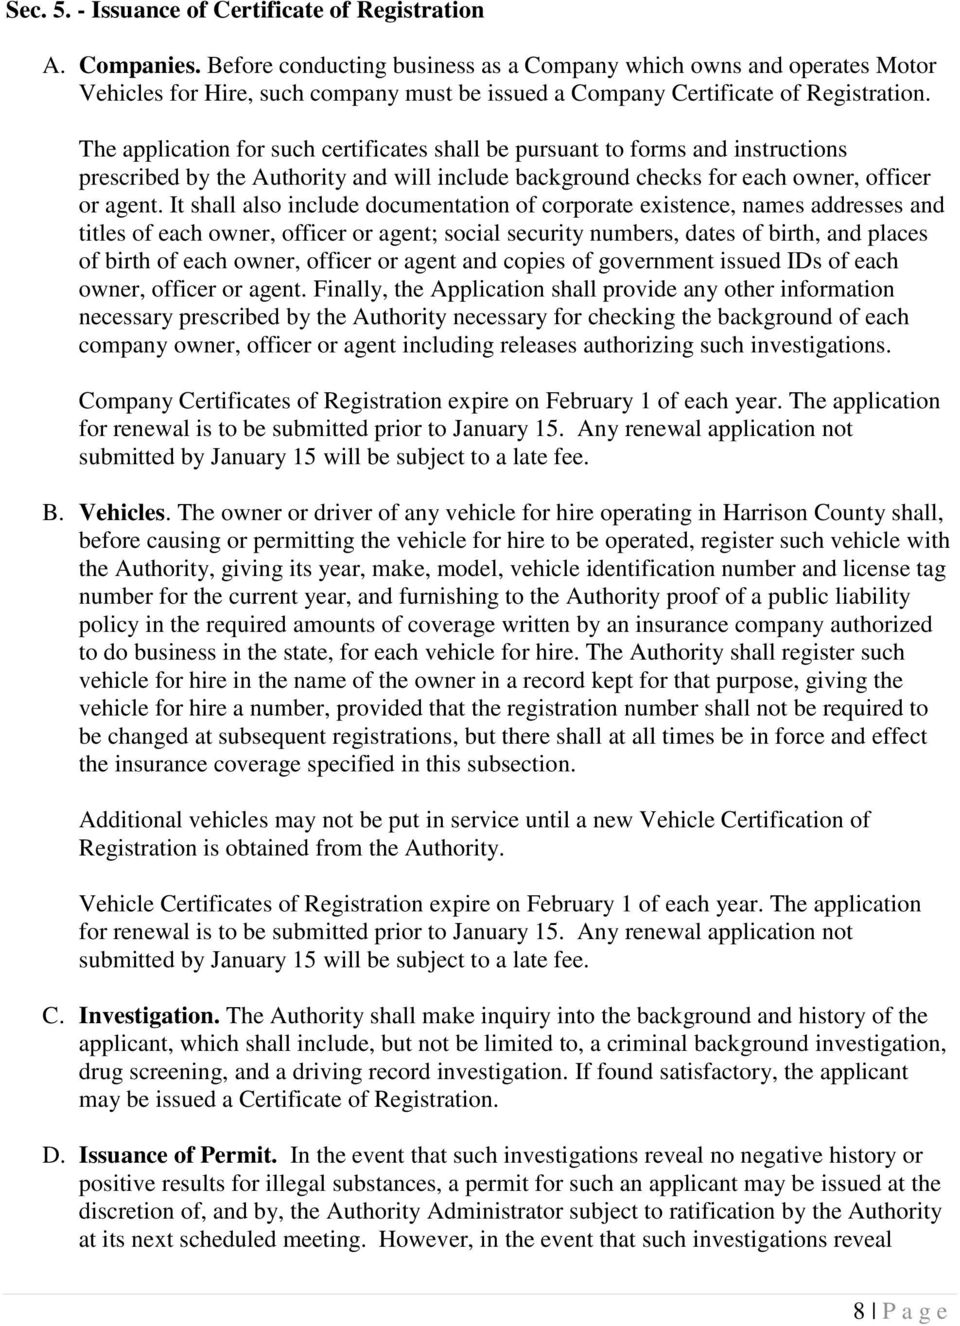 The application for such certificates shall be pursuant to forms and instructions prescribed by the Authority and will include background checks for each owner, officer or agent.